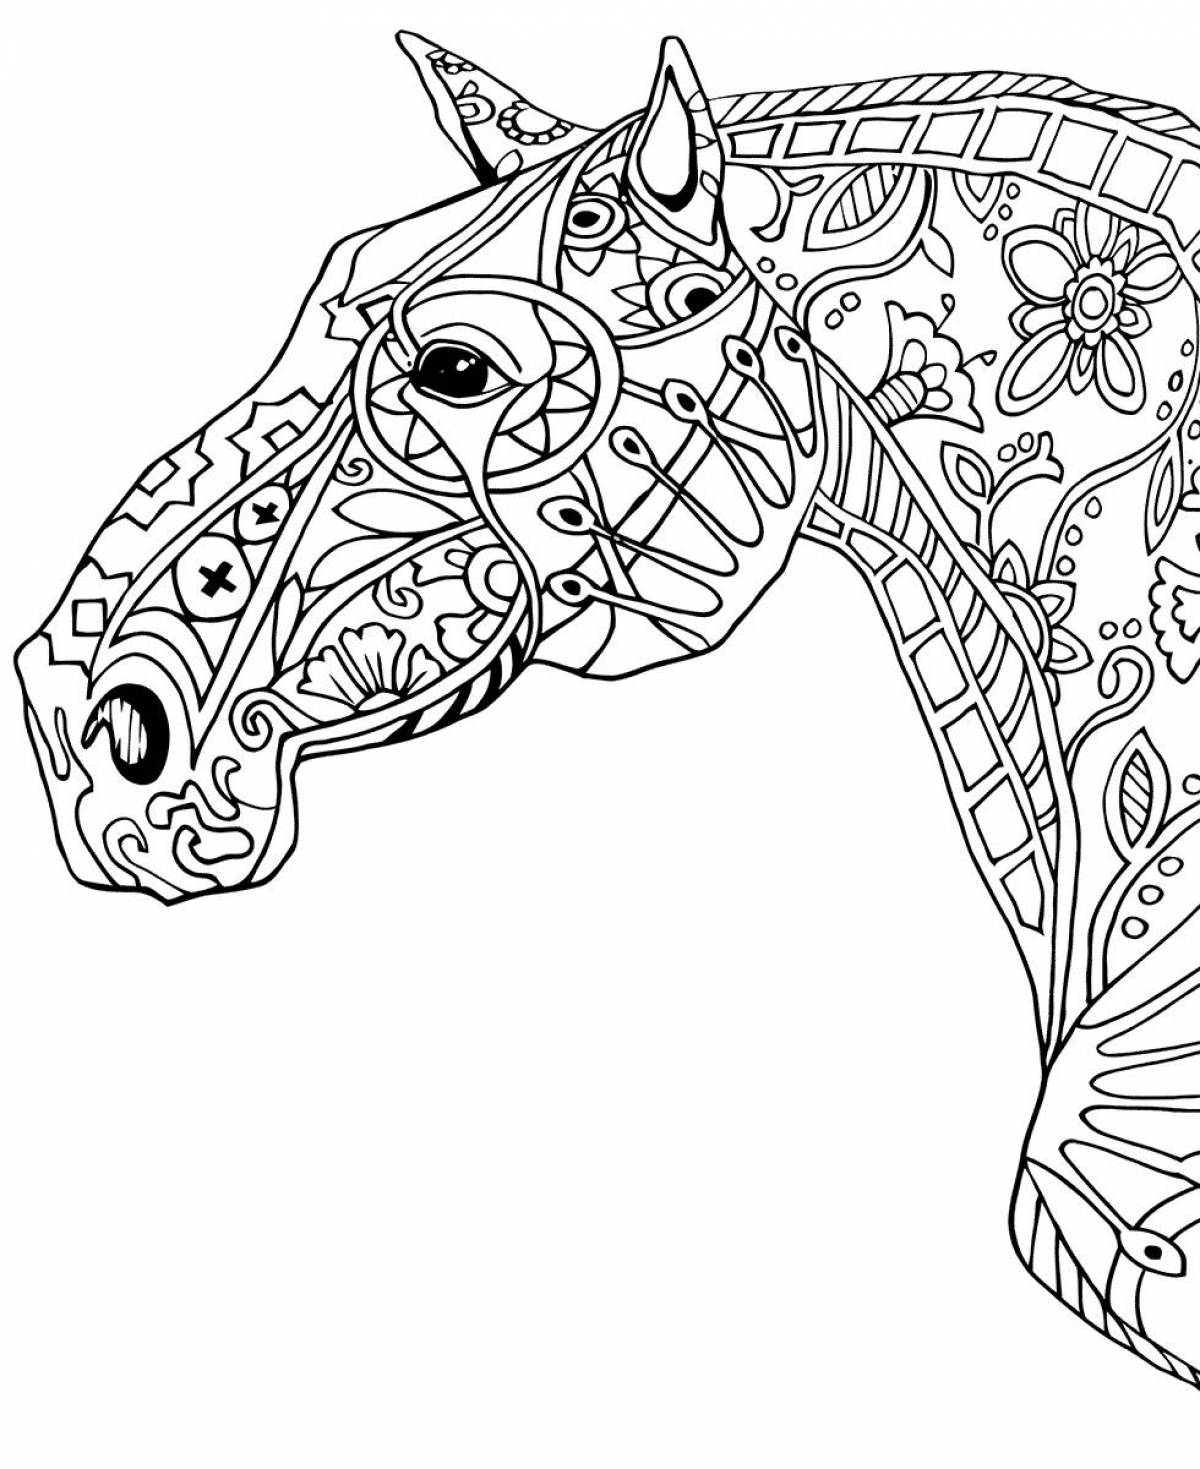 Patterned horse head